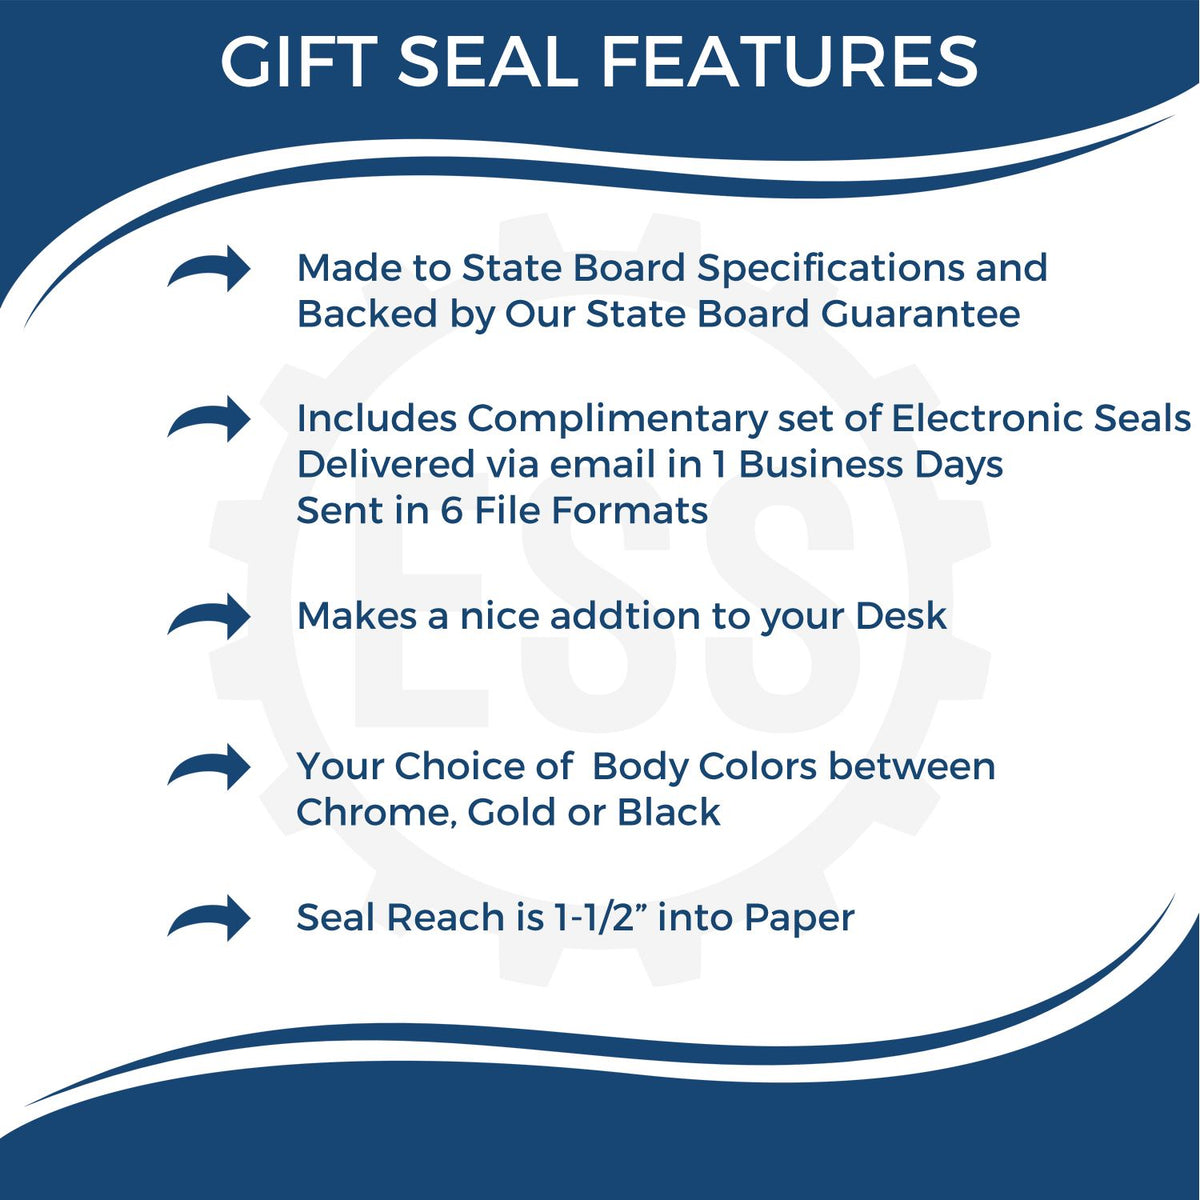 A picture of an infographic highlighting the selling points for the Gift Vermont Engineer Seal